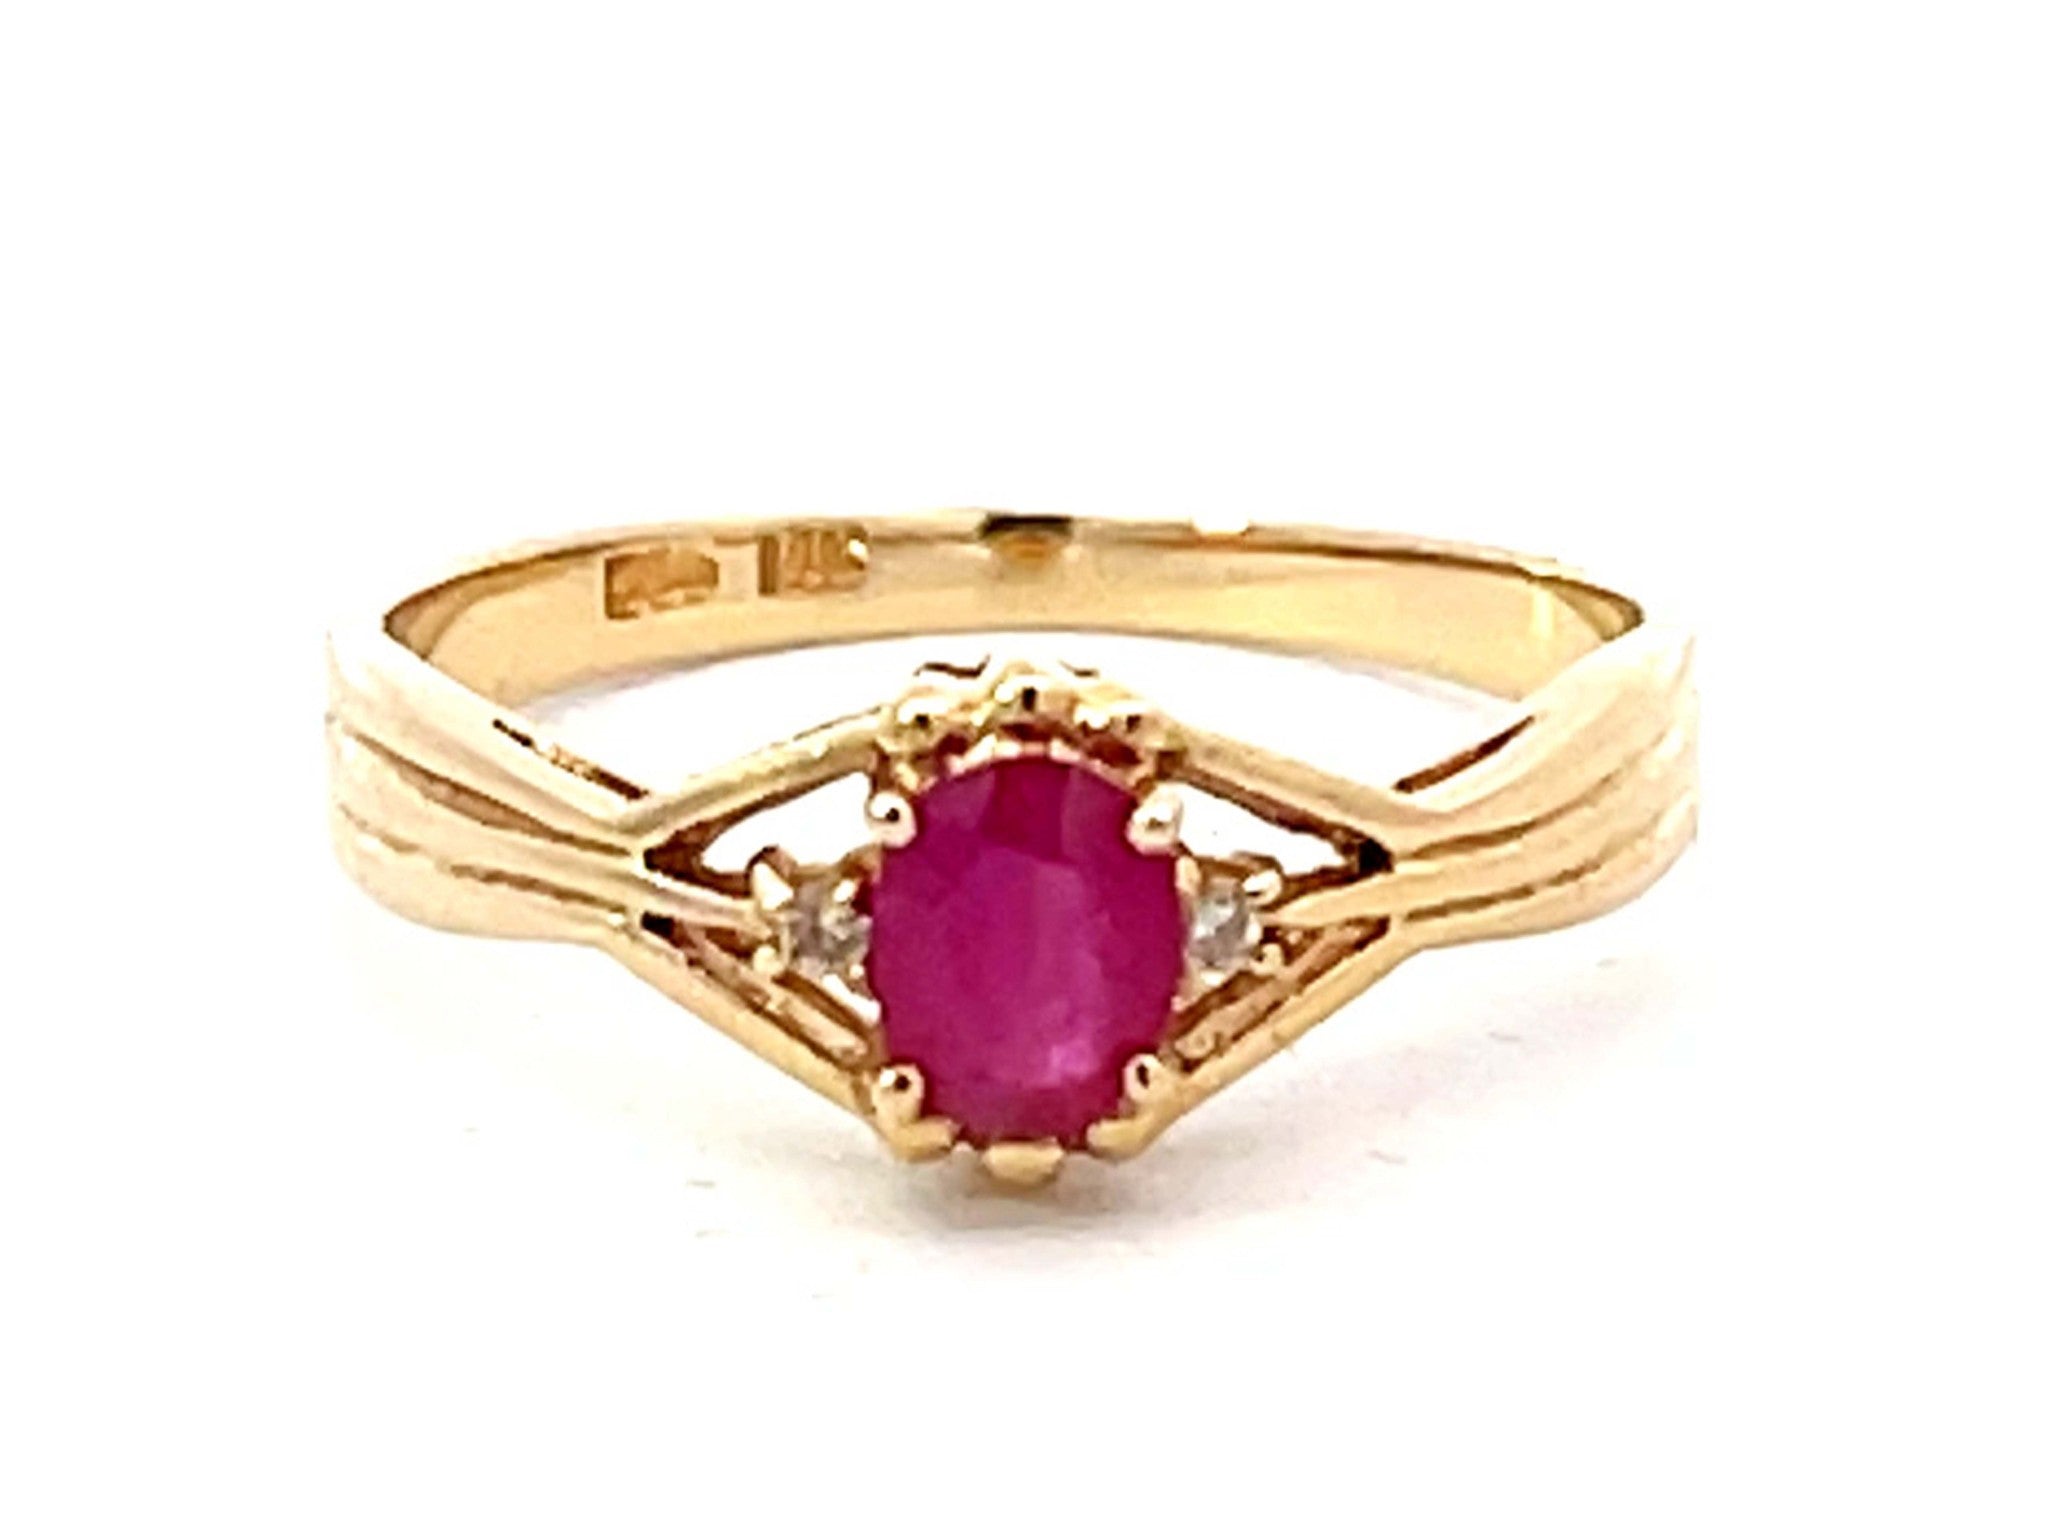 Oval Red Ruby Diamond Ring in 14k Yellow Gold